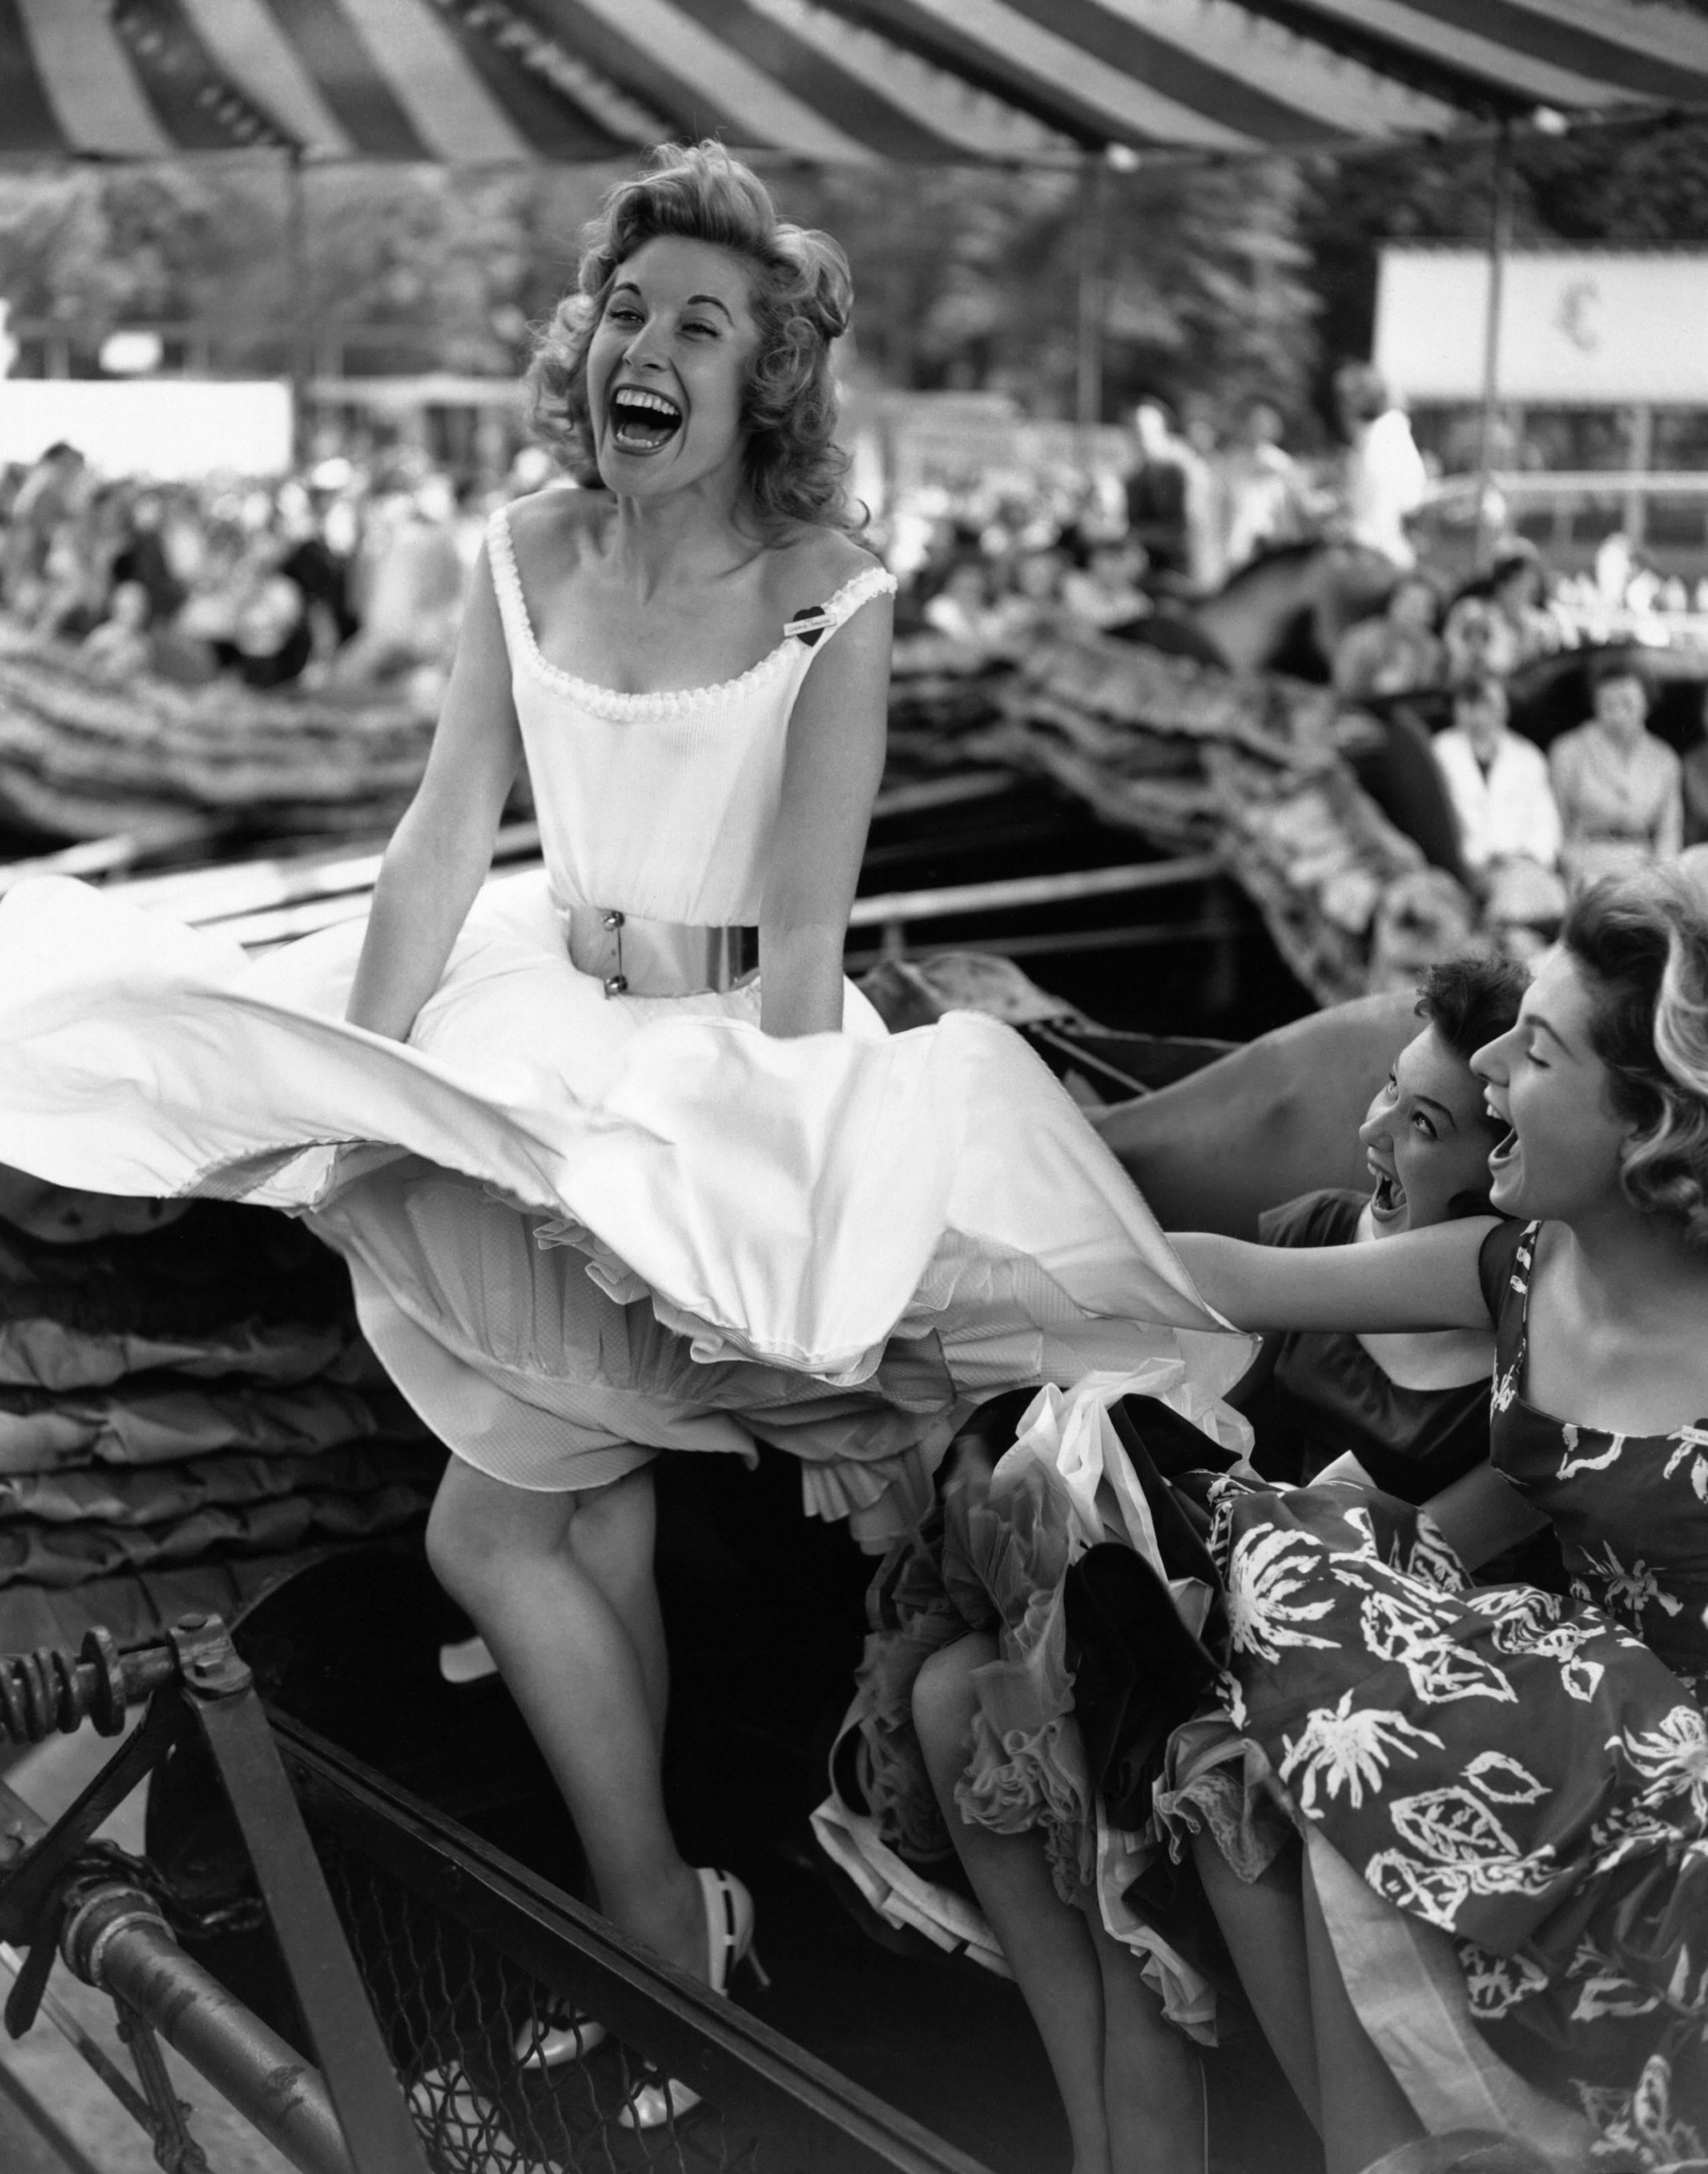 Three women enjoying the wind machine at the opening of the Festival Gardens fun fair, Battersea Park, London.

- Rare signed print, signature on front.
- Hand printed silver gelatin fibre photograph. 
- Printed using the original negative. 
-